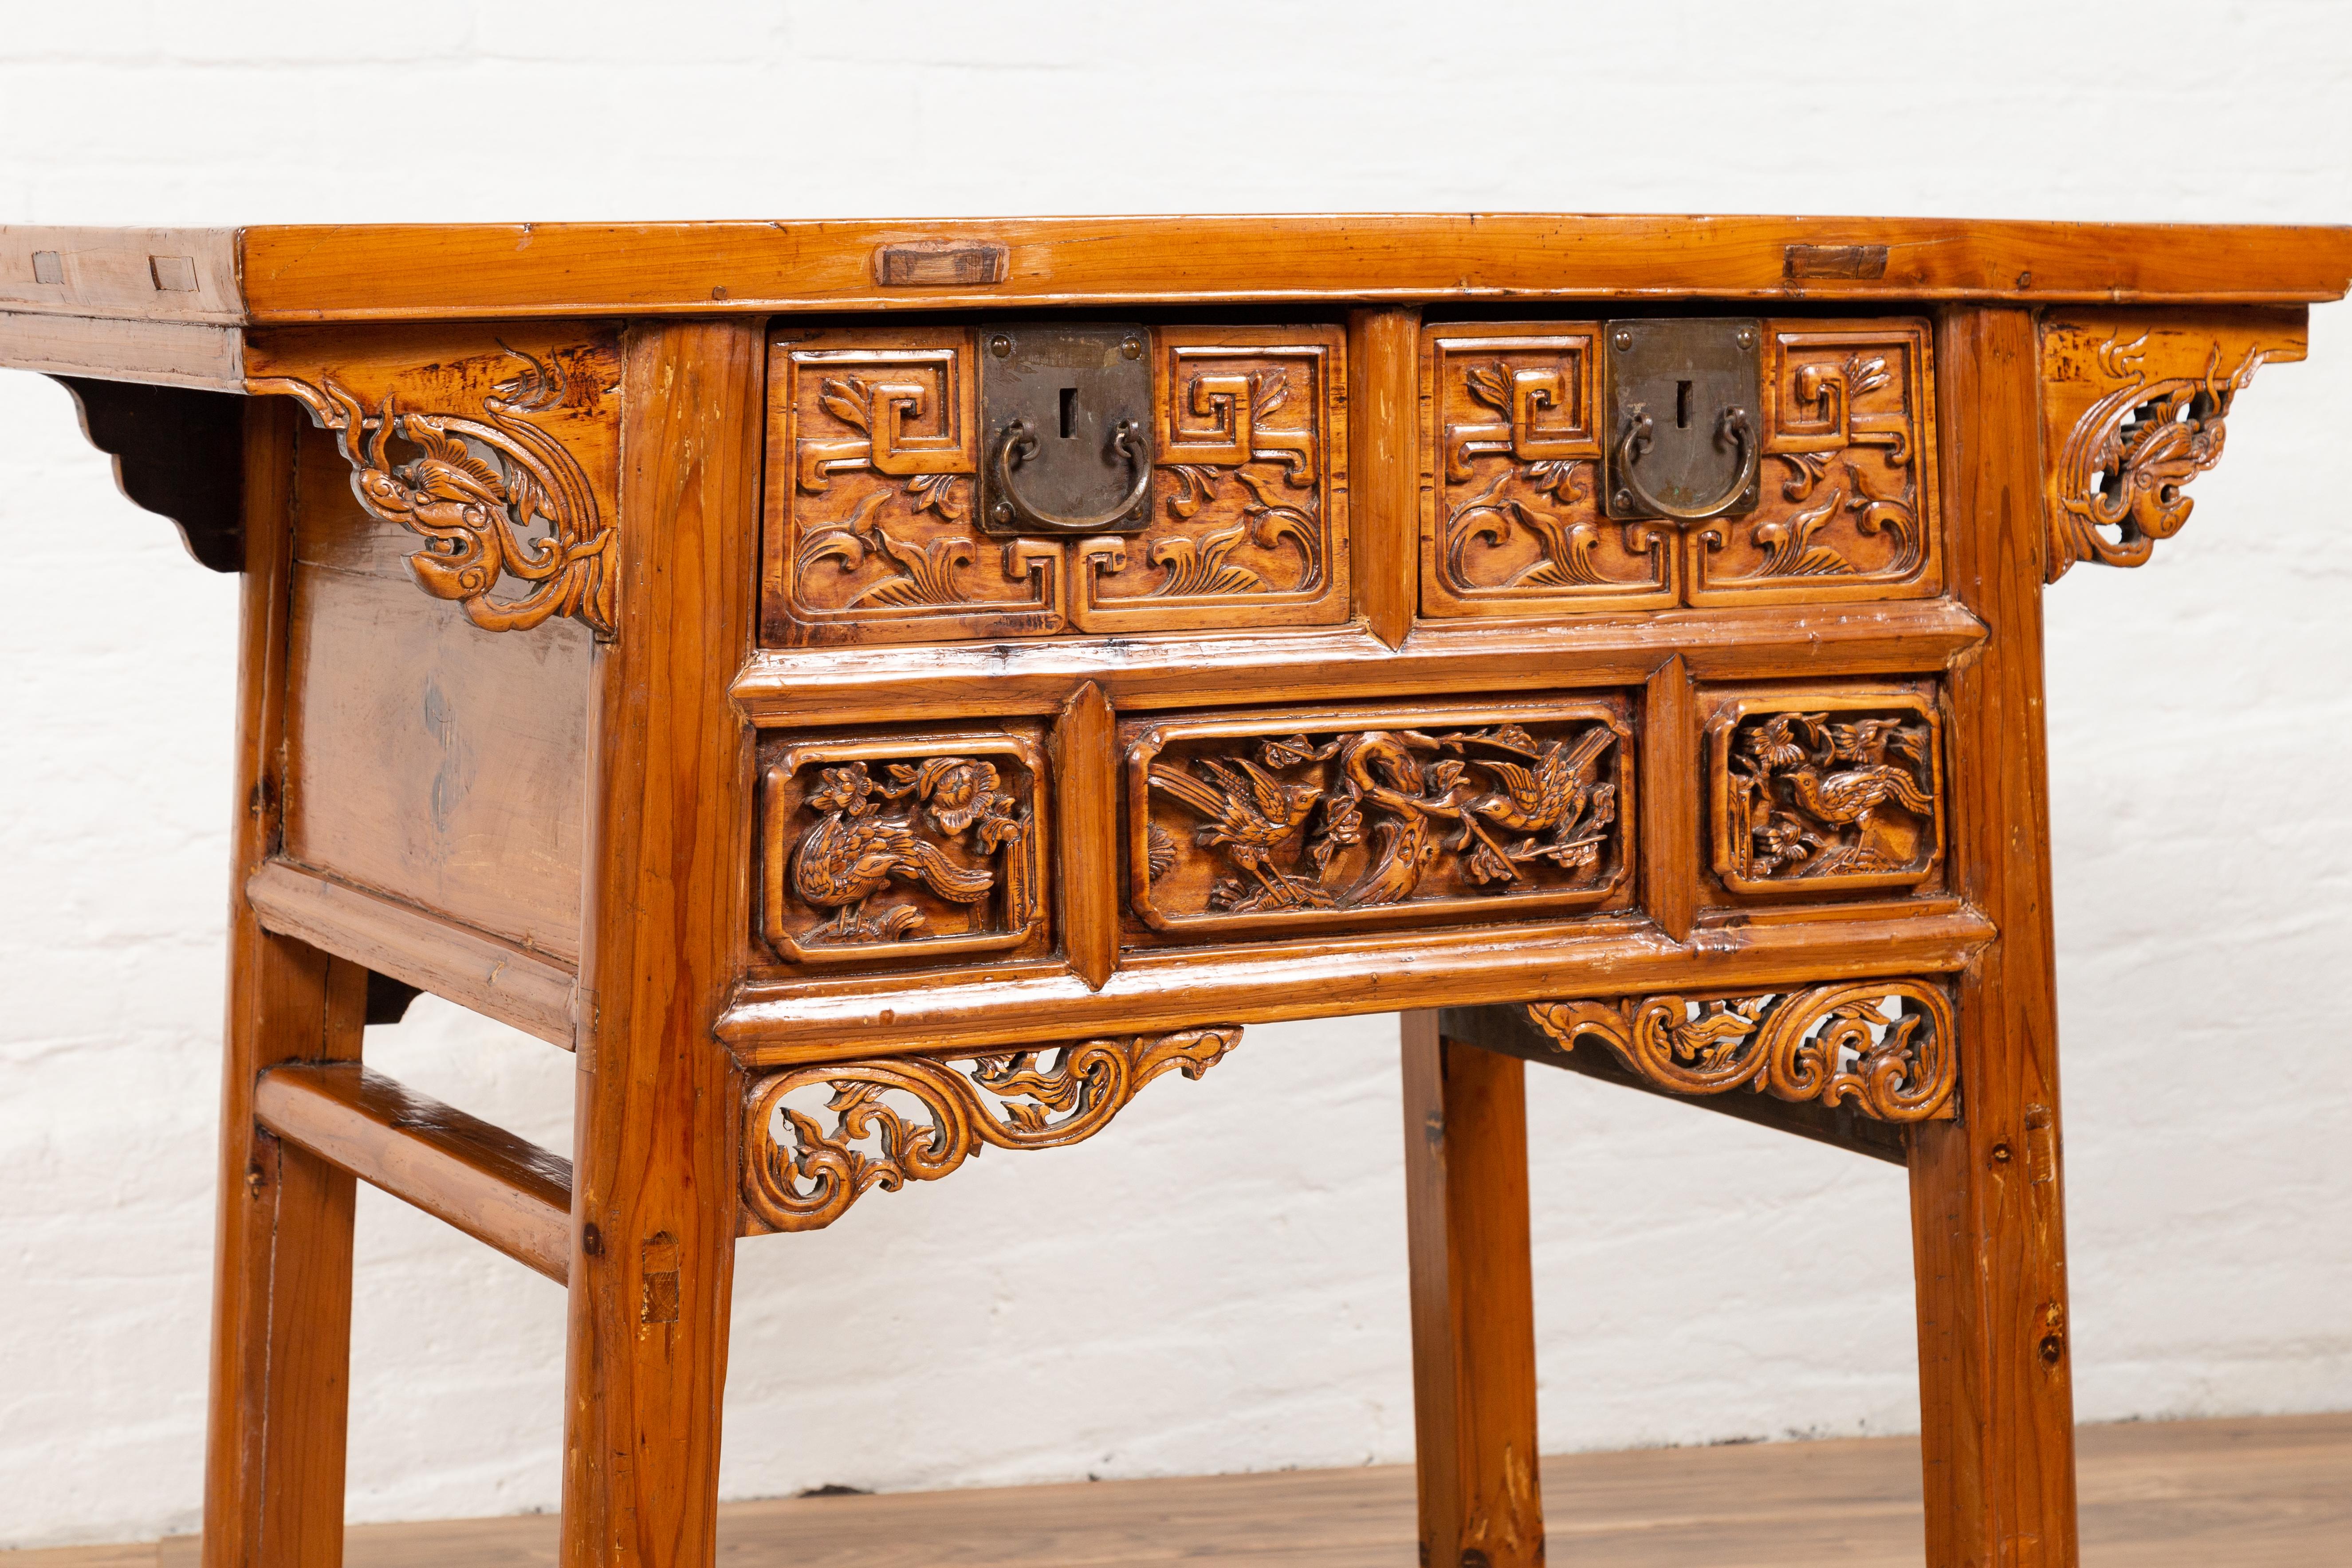 Hand-Carved Antique Chinese Console Table with Hand Carved Décor of Birds and Flowers